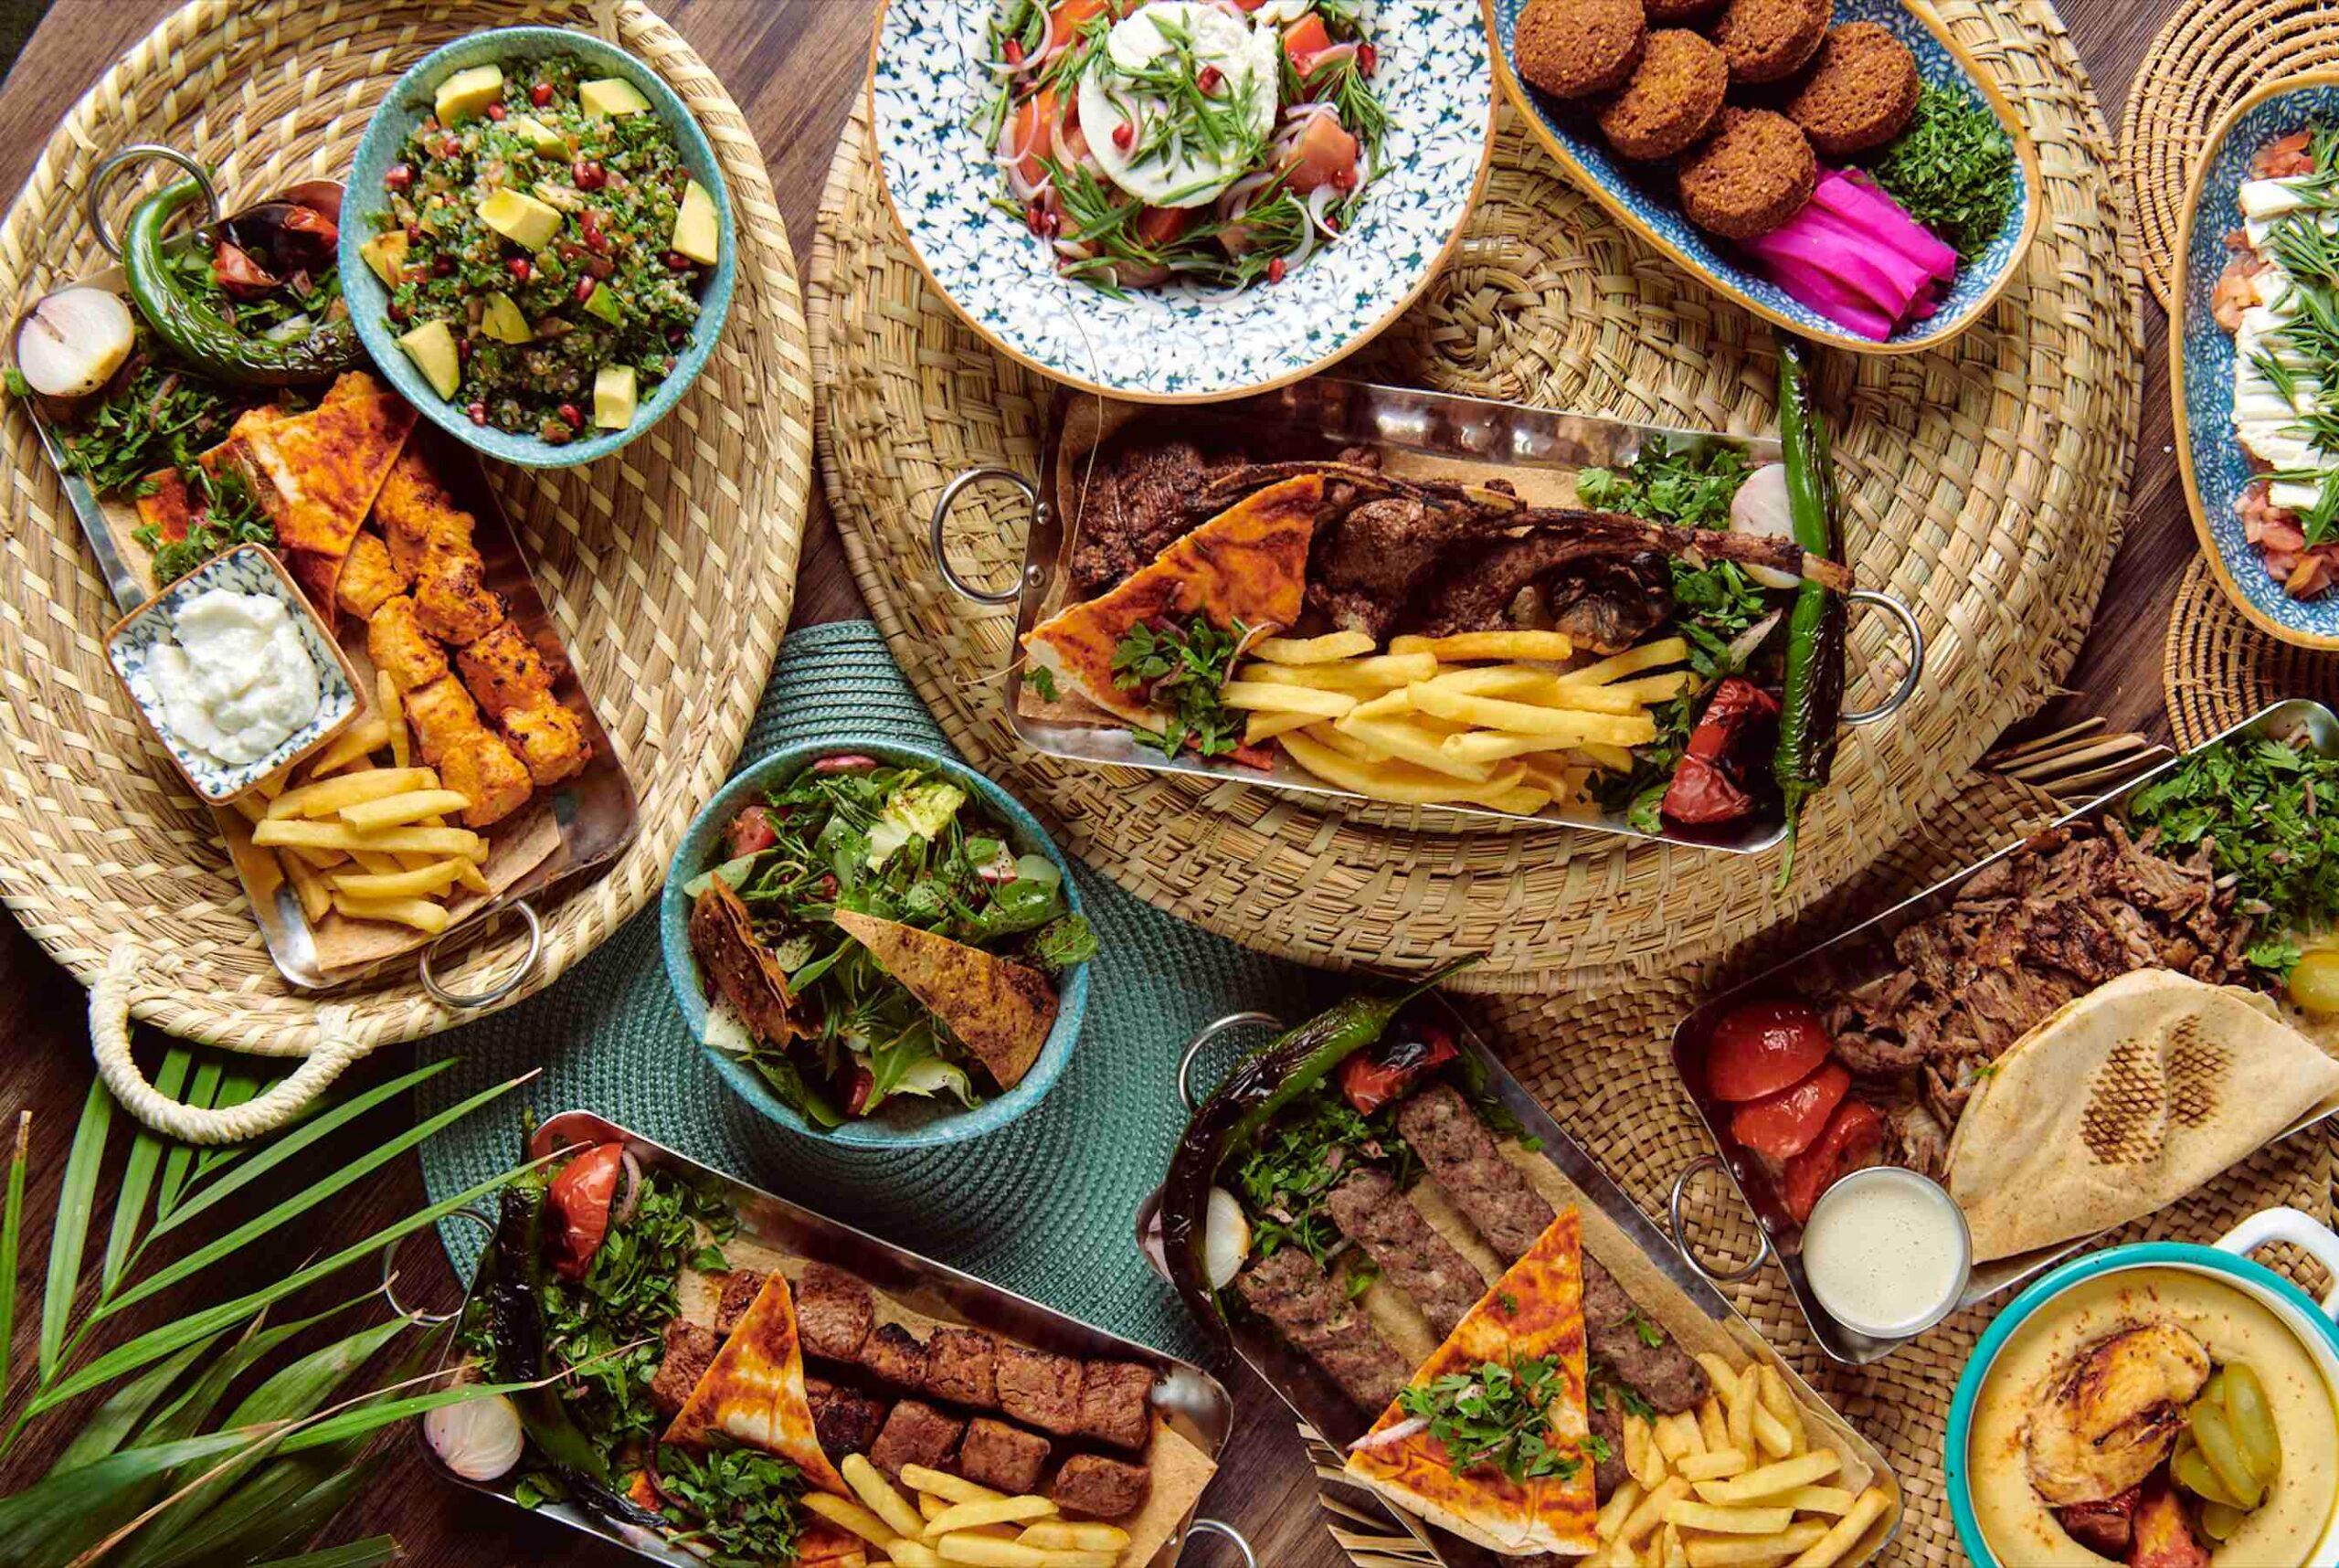 Café Beirut in Abu Dhabi: A taste of Lebanon is coming to the capital